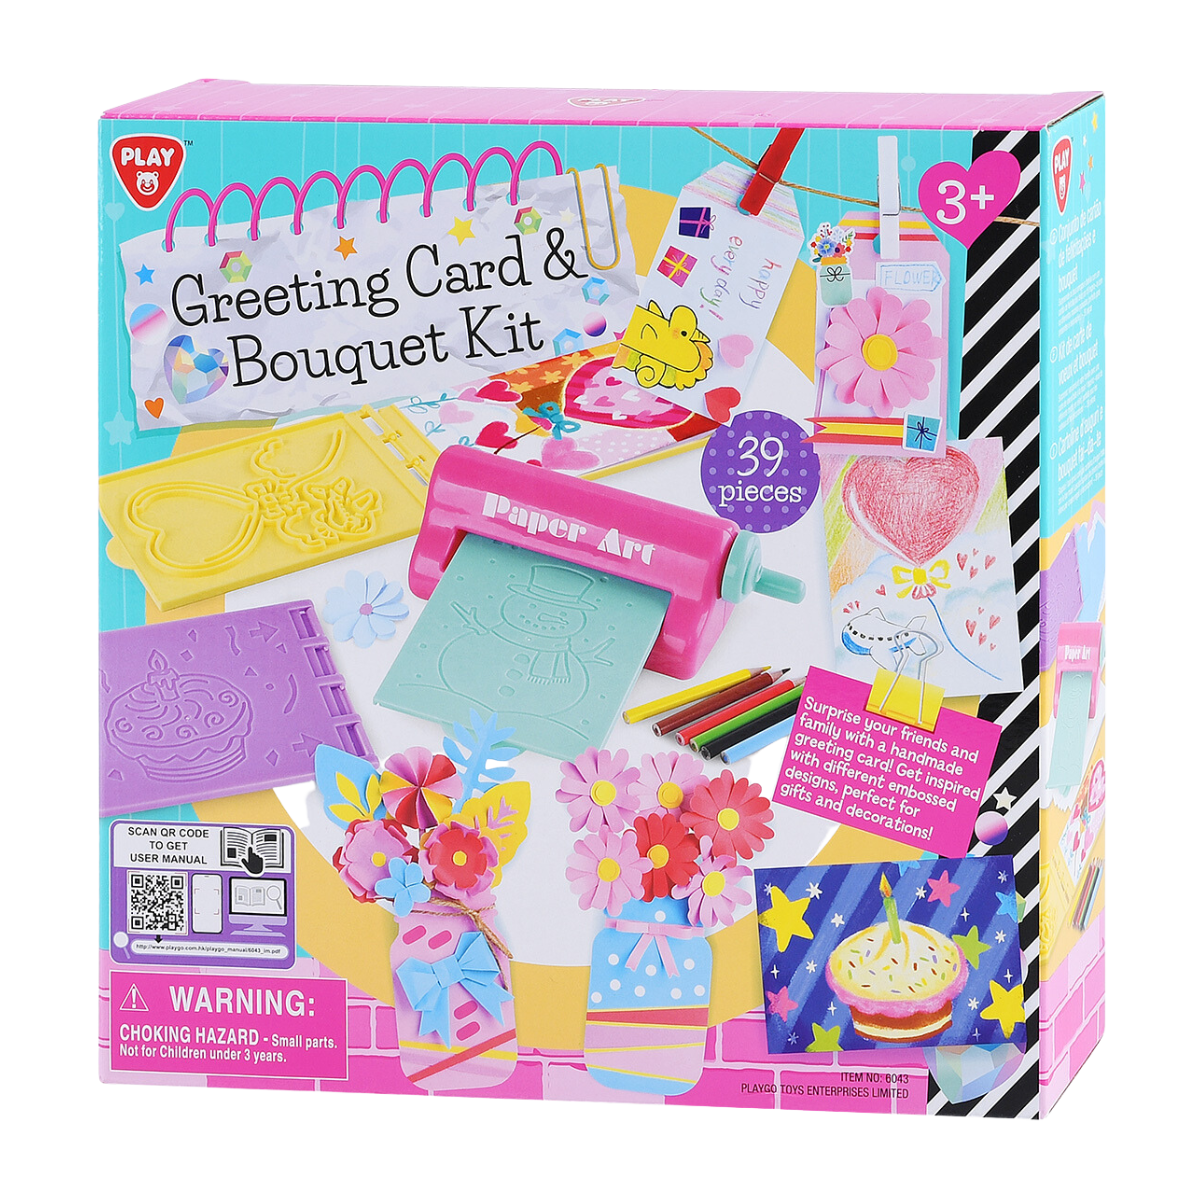 Greeting Card &amp; Bouquet Kit